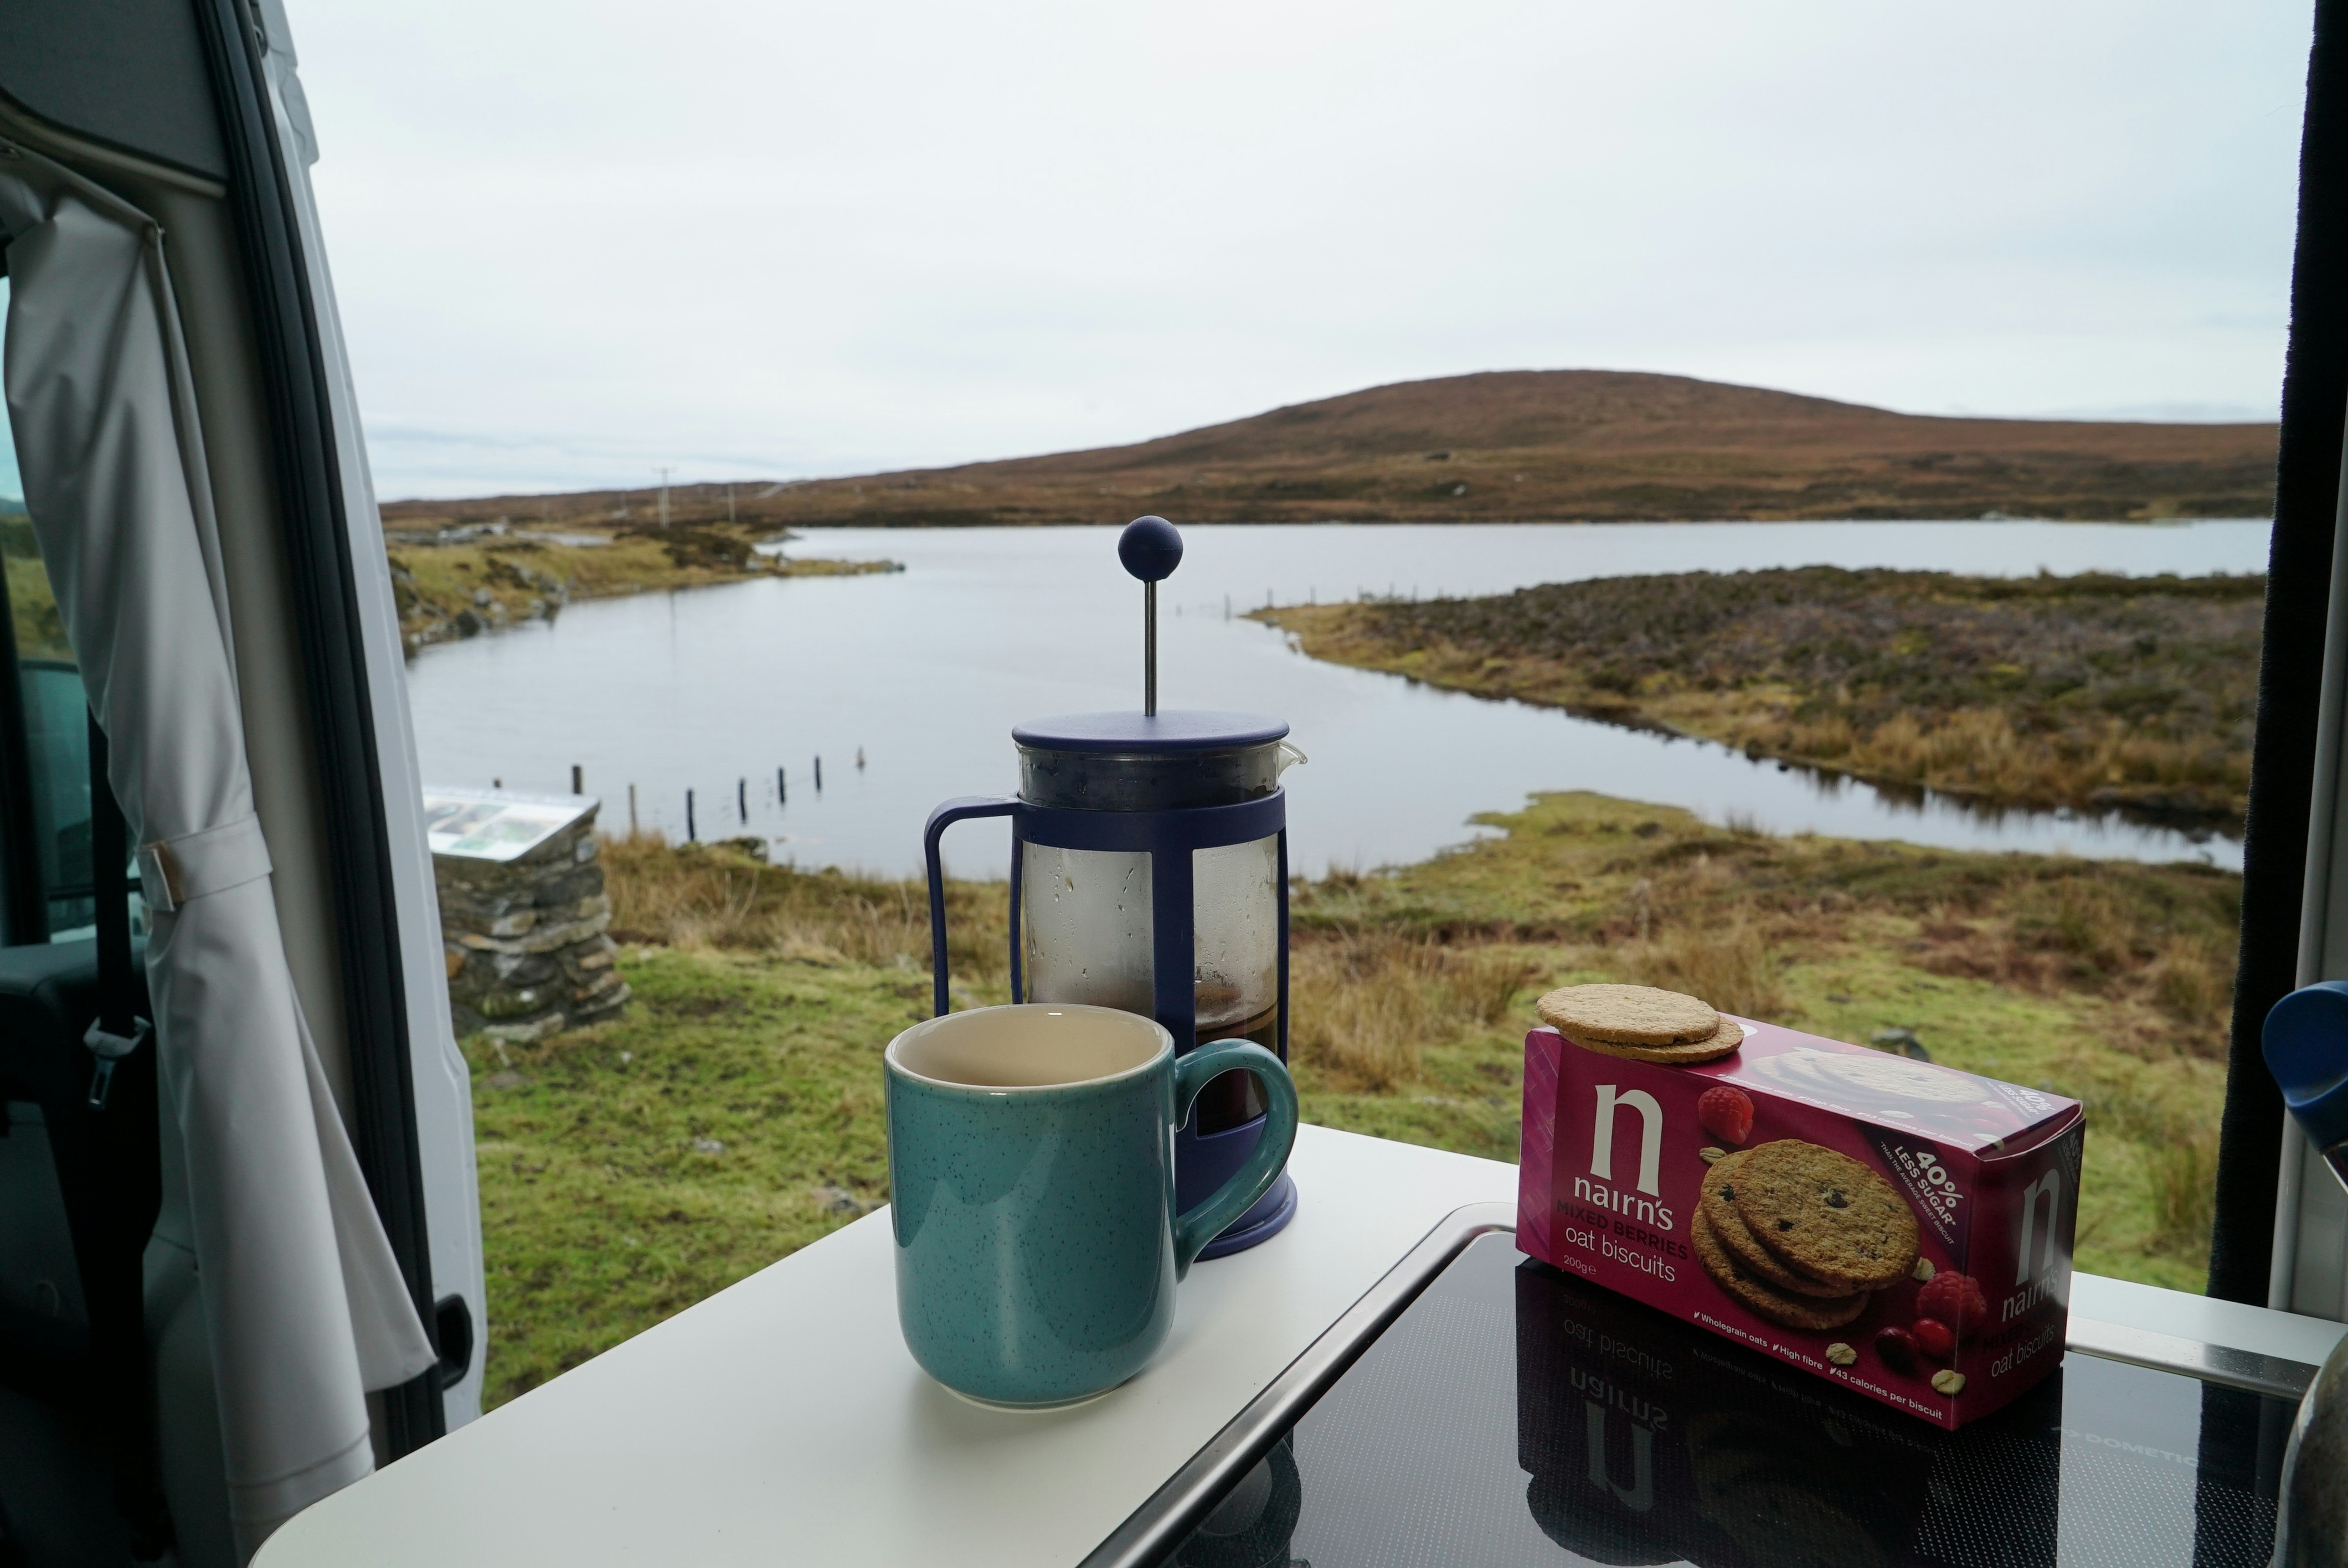 A mug of coffee and accompanying biscuits stand on a table of a camper van with the door open behind it, revealing a scenic view of a lake and green mountains.